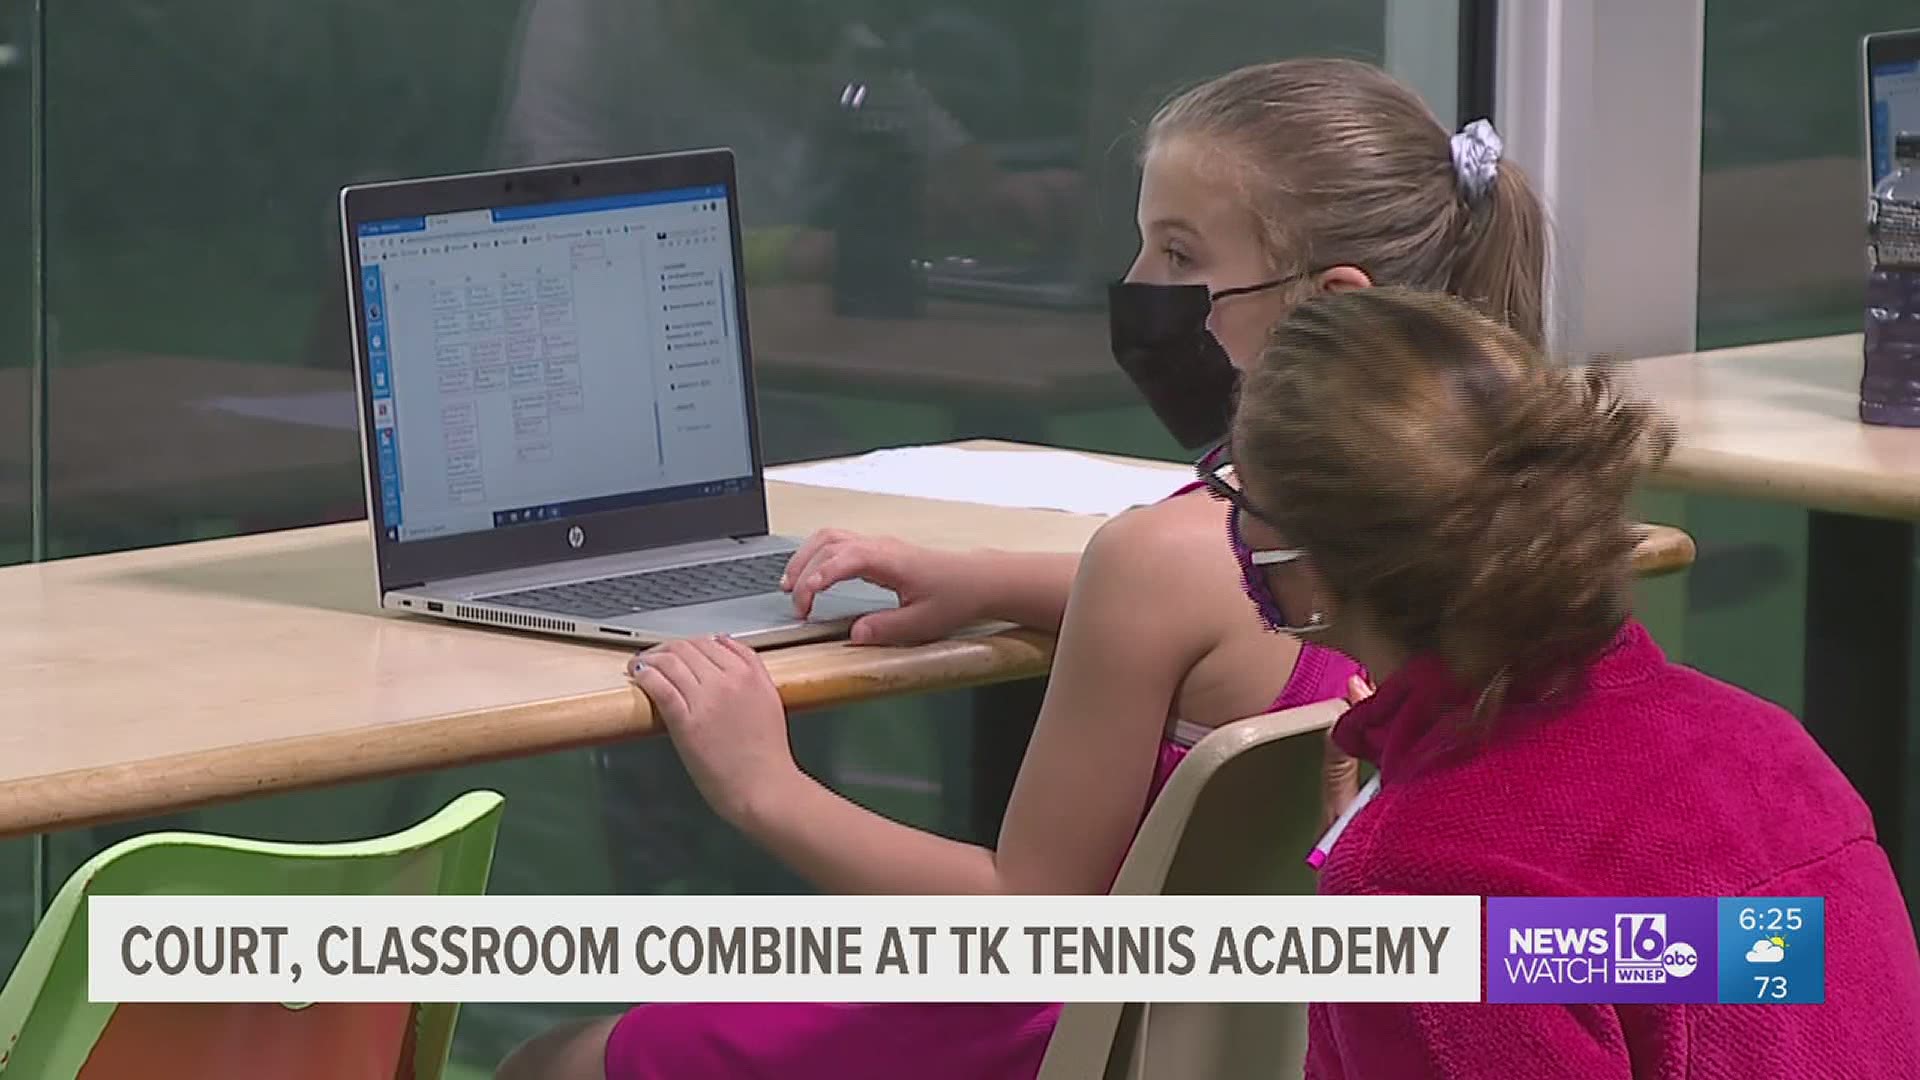 TK Tennis Academy brings court and classroom together with cyber school